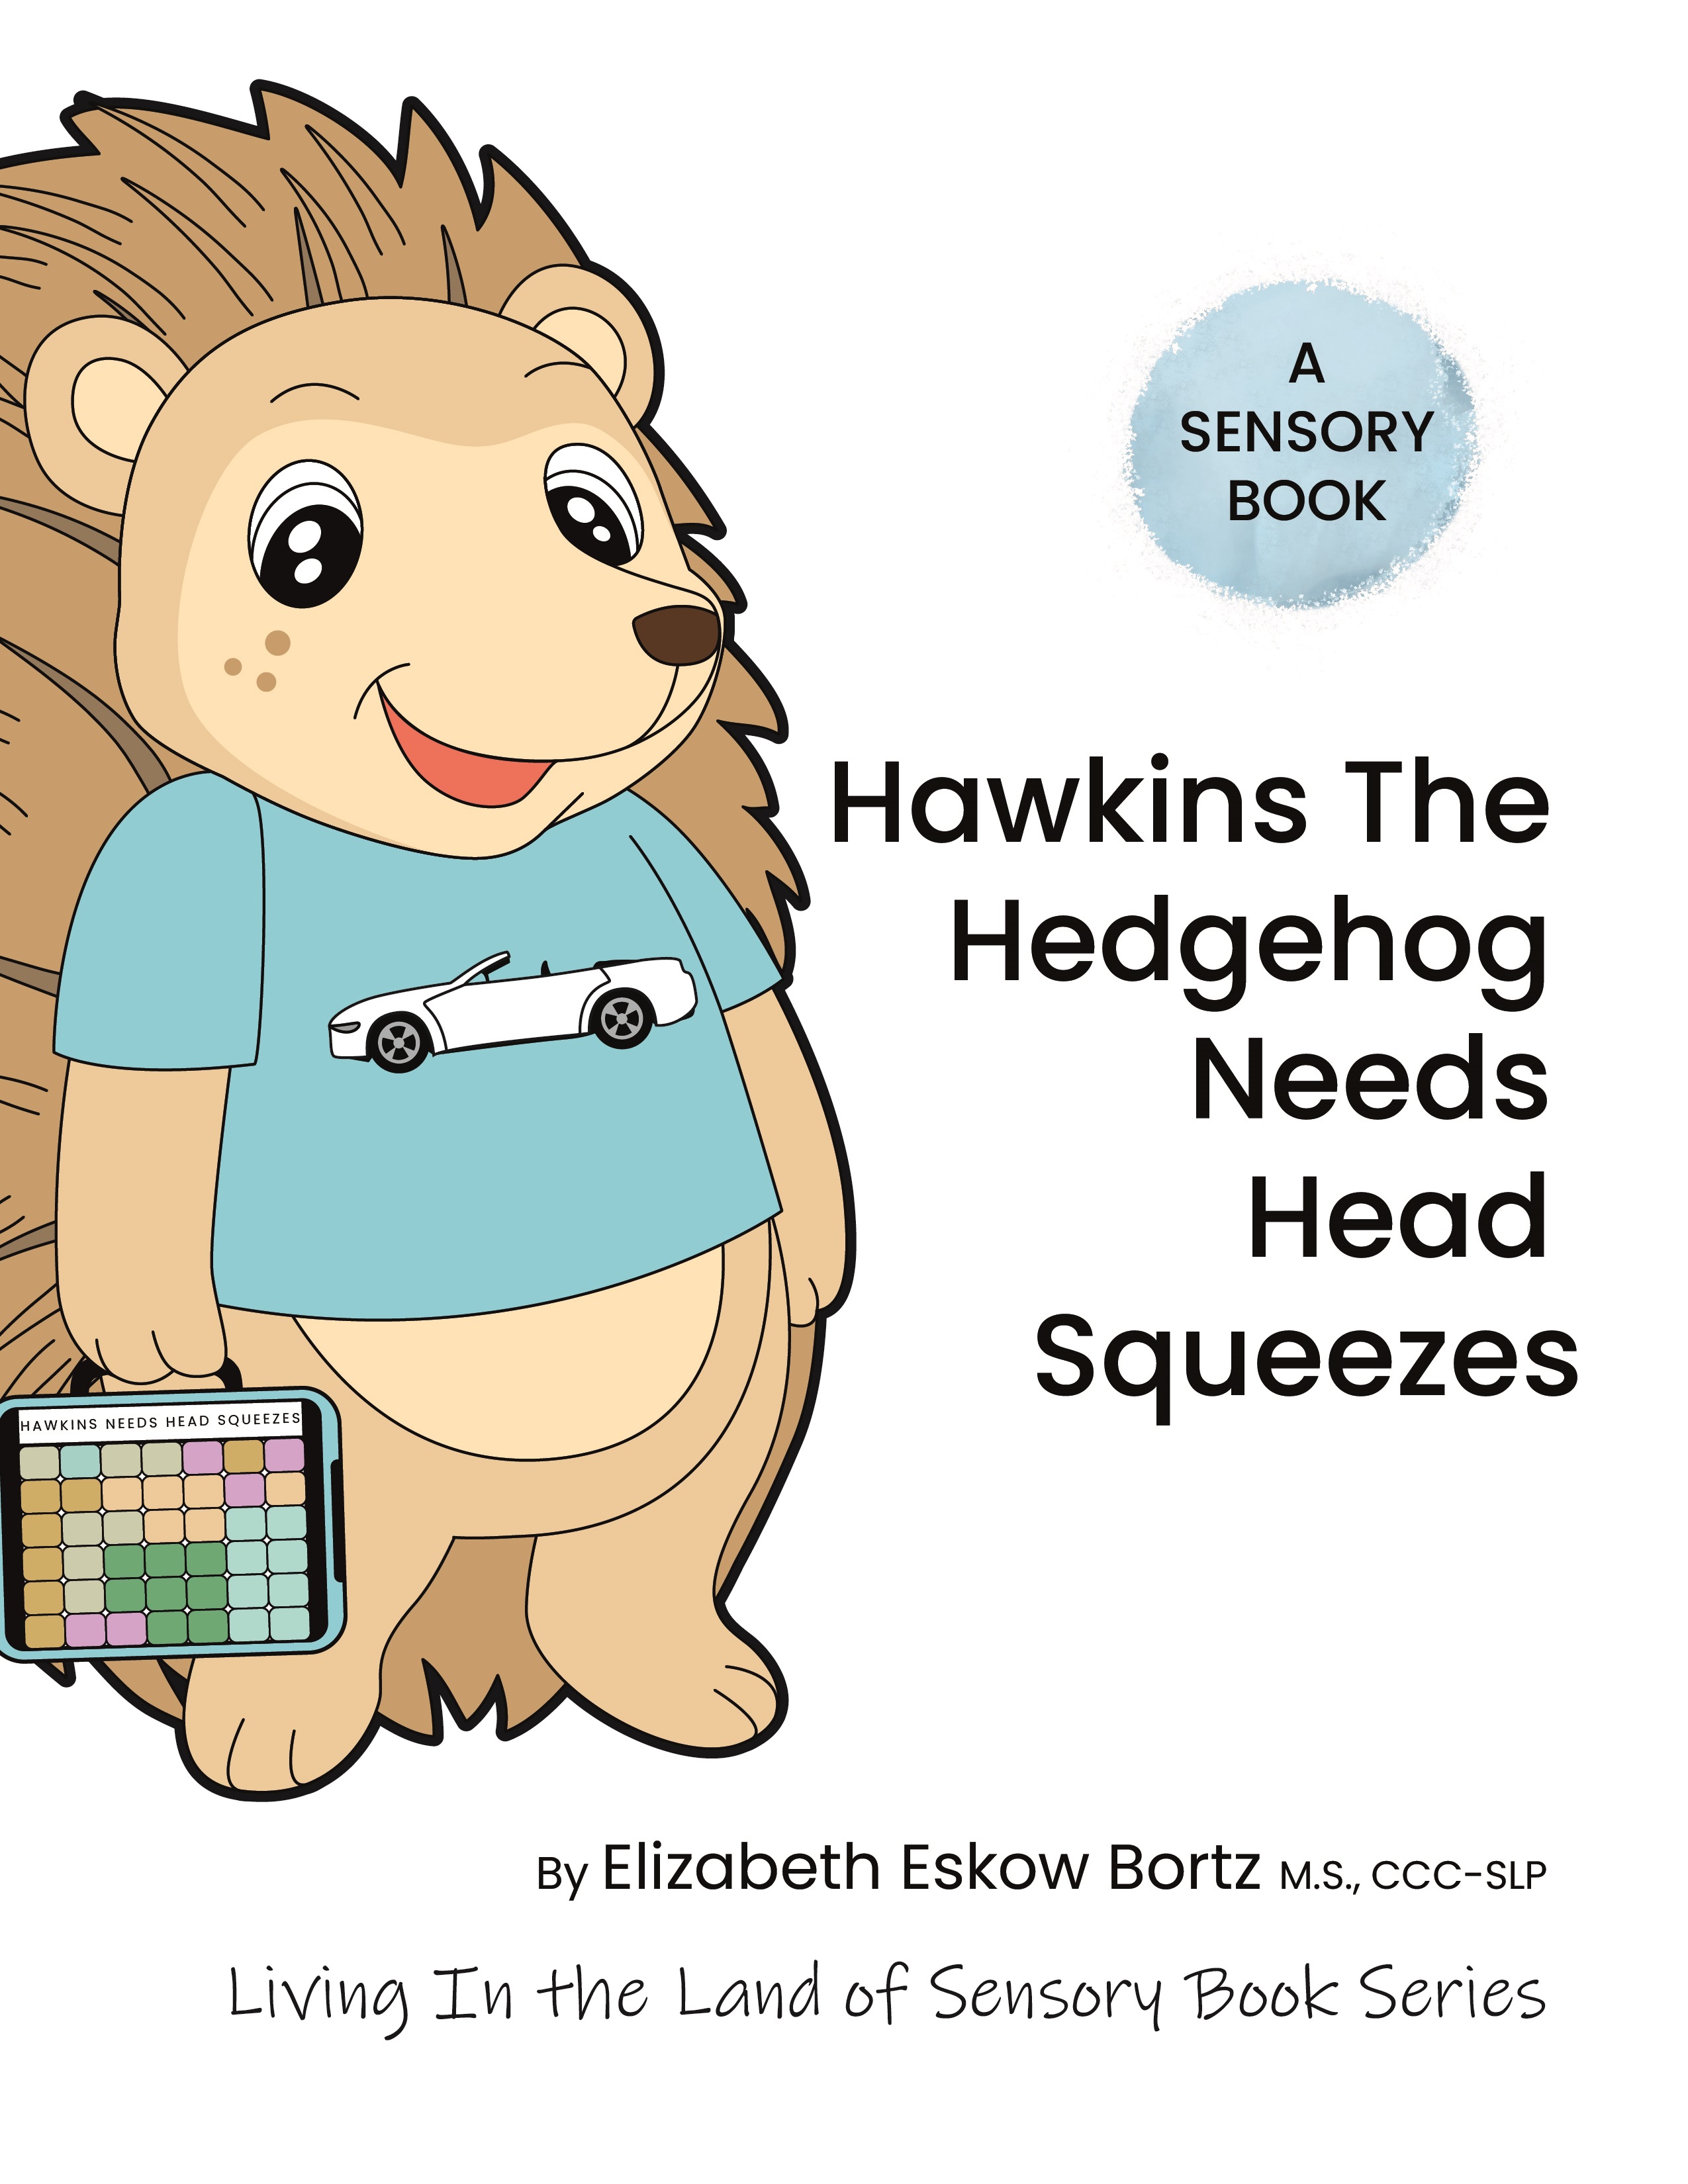 Hawkins The Hedgehog Needs Head Squeezes is a book designed to help teach the head squeezing sensory strategy as well as equip support teams with how to foster language growth related to sensory needs